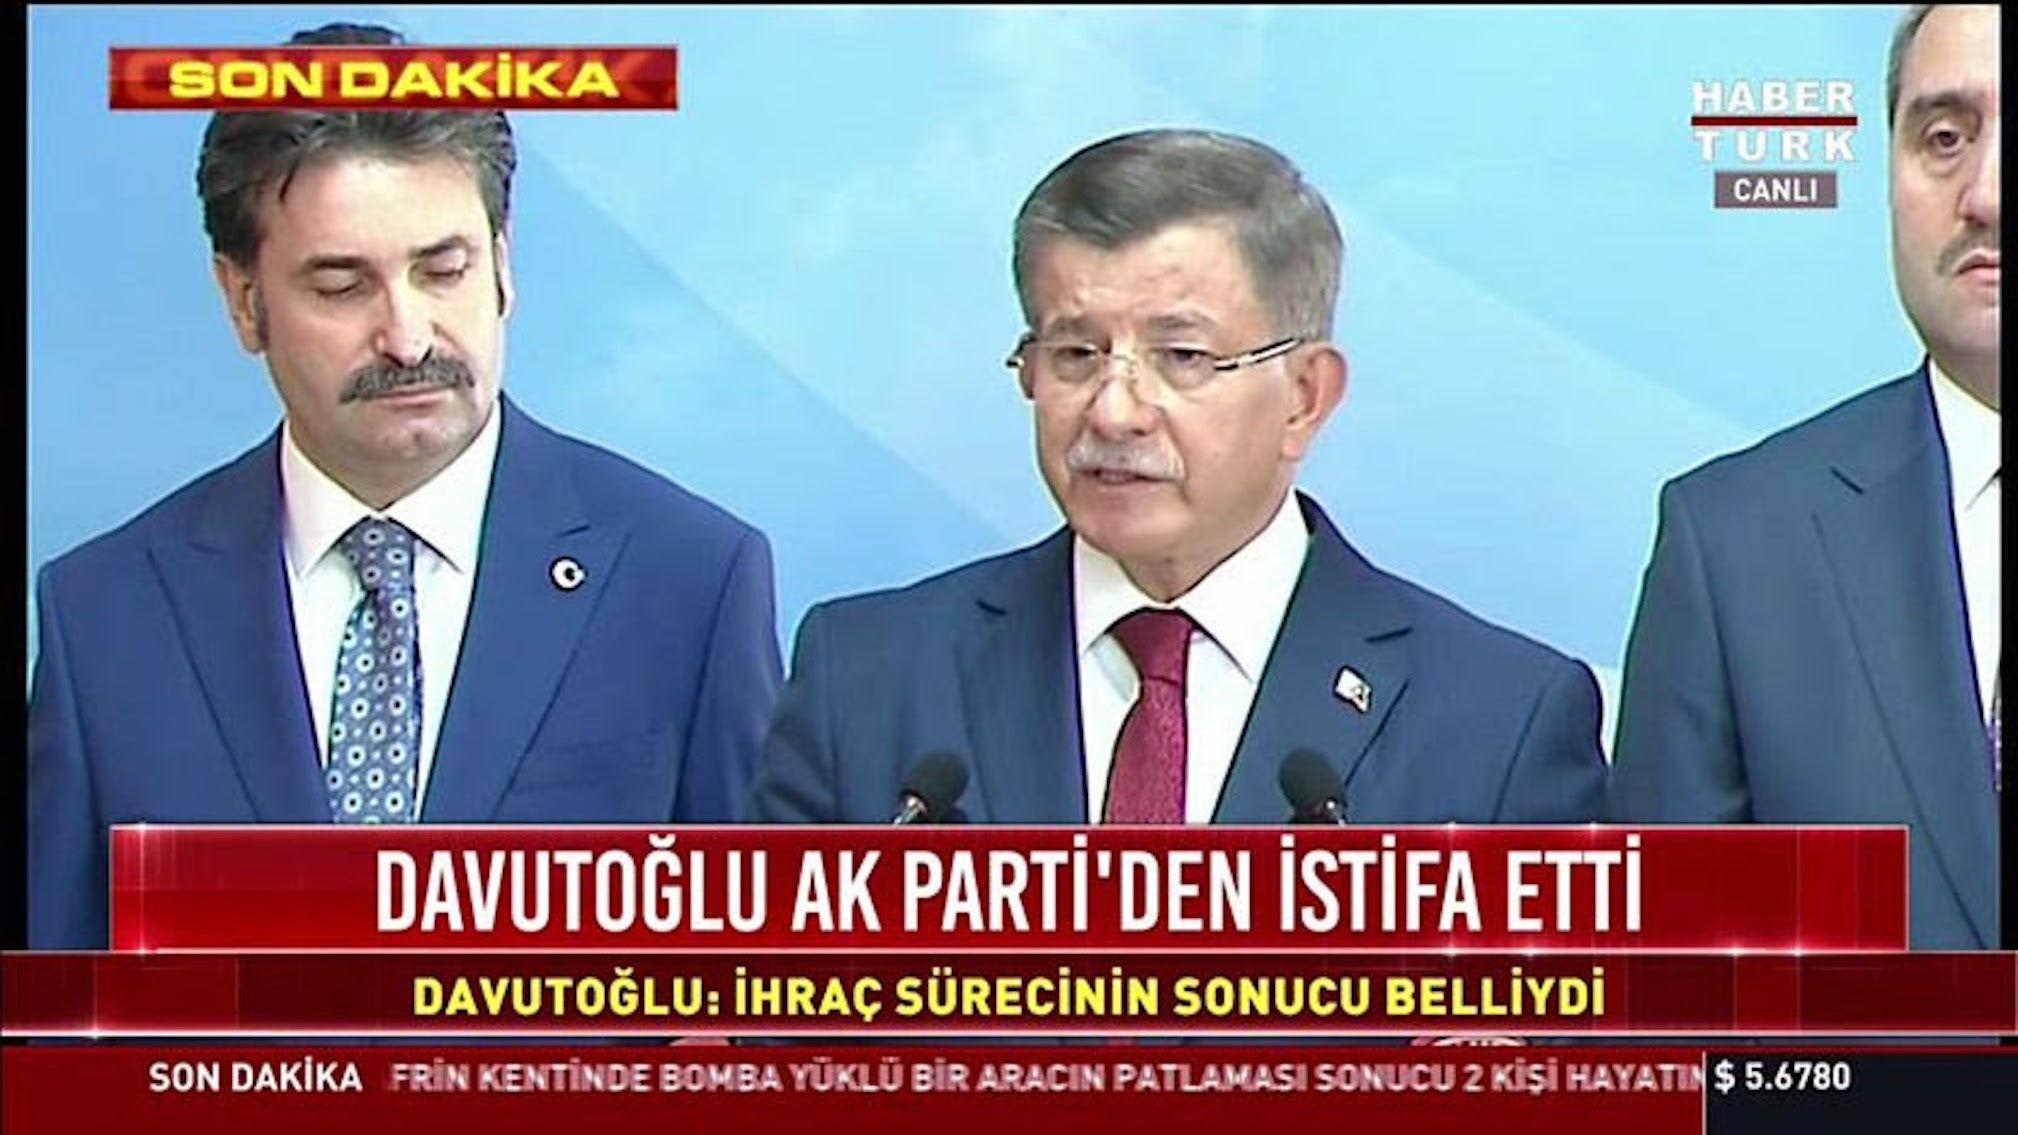 Mr Davutoglu announced his resignation in a televised appearance